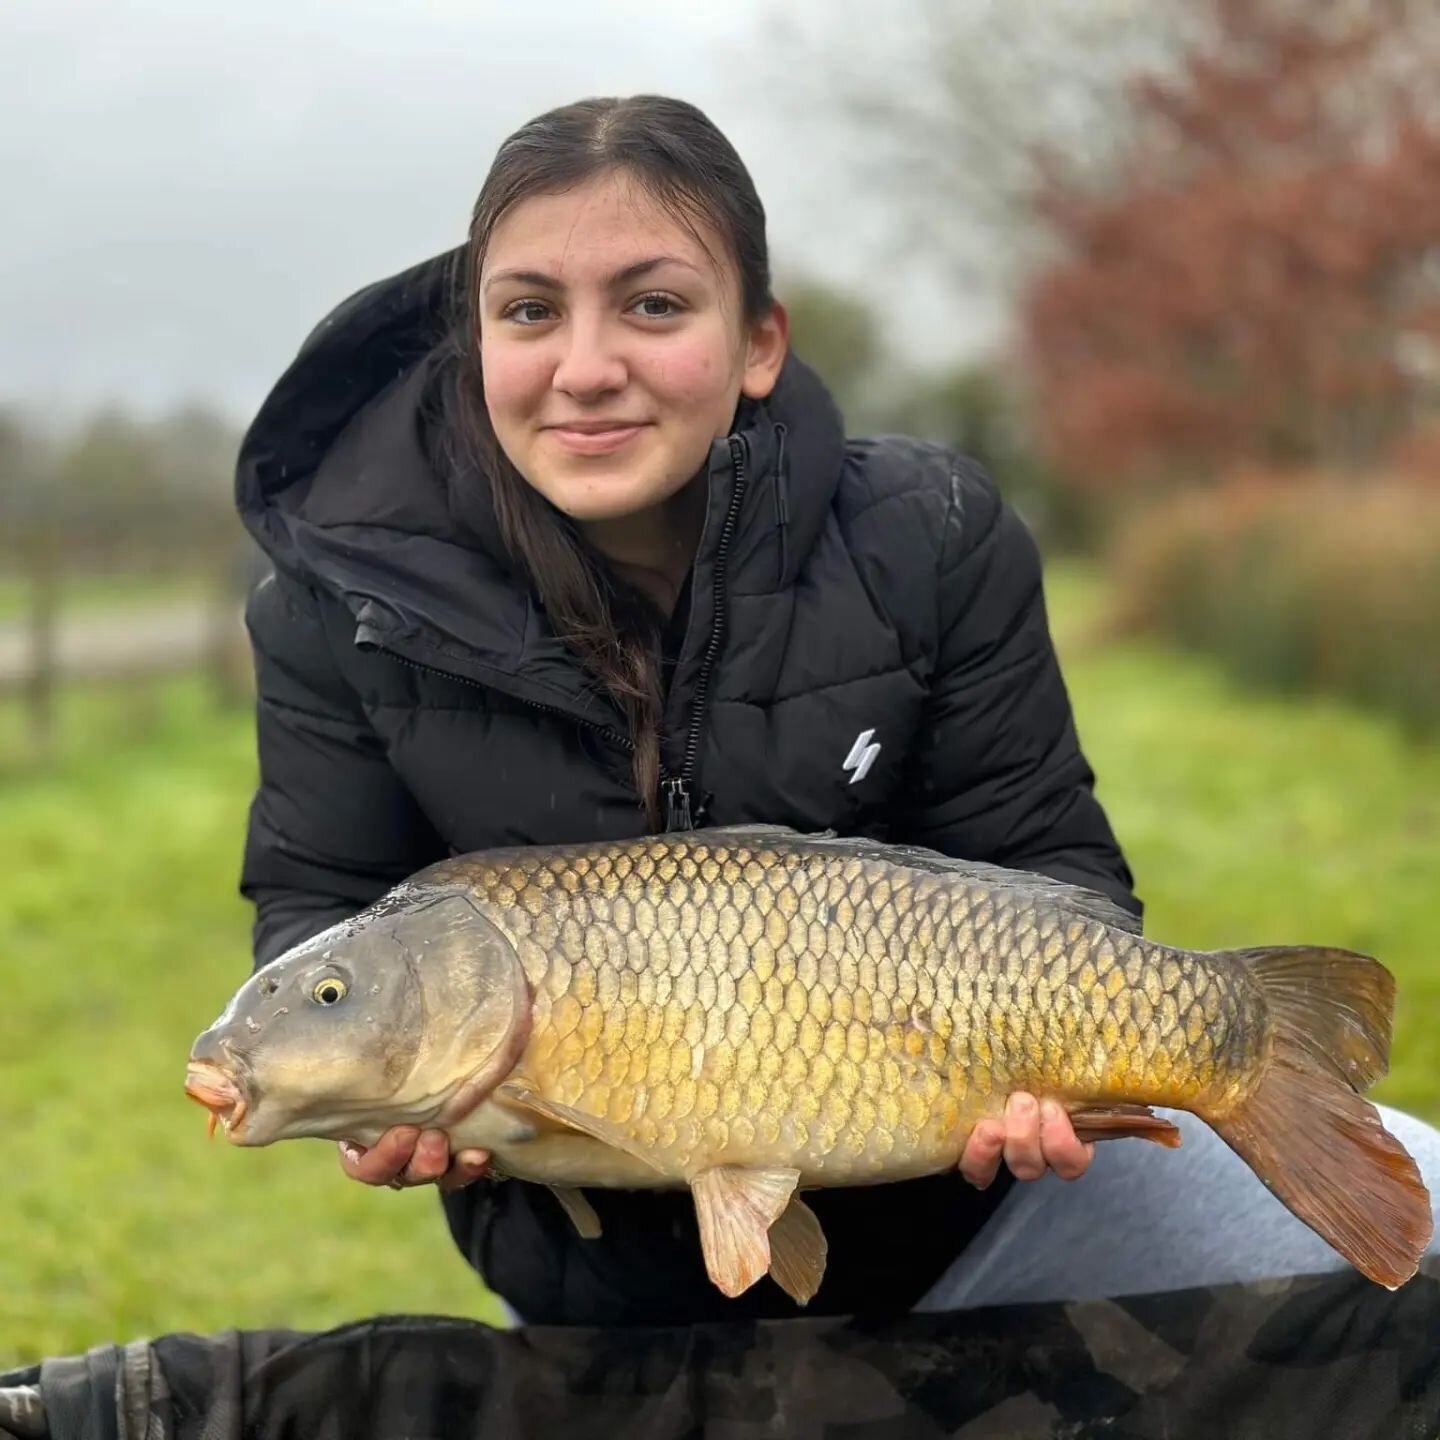 Undoubtedly, a damp and dreary start to the season, but some lovely specimens caught on our carp lake!

#carpfishing
#fishinglakes
#fishing 
#fishingholidays